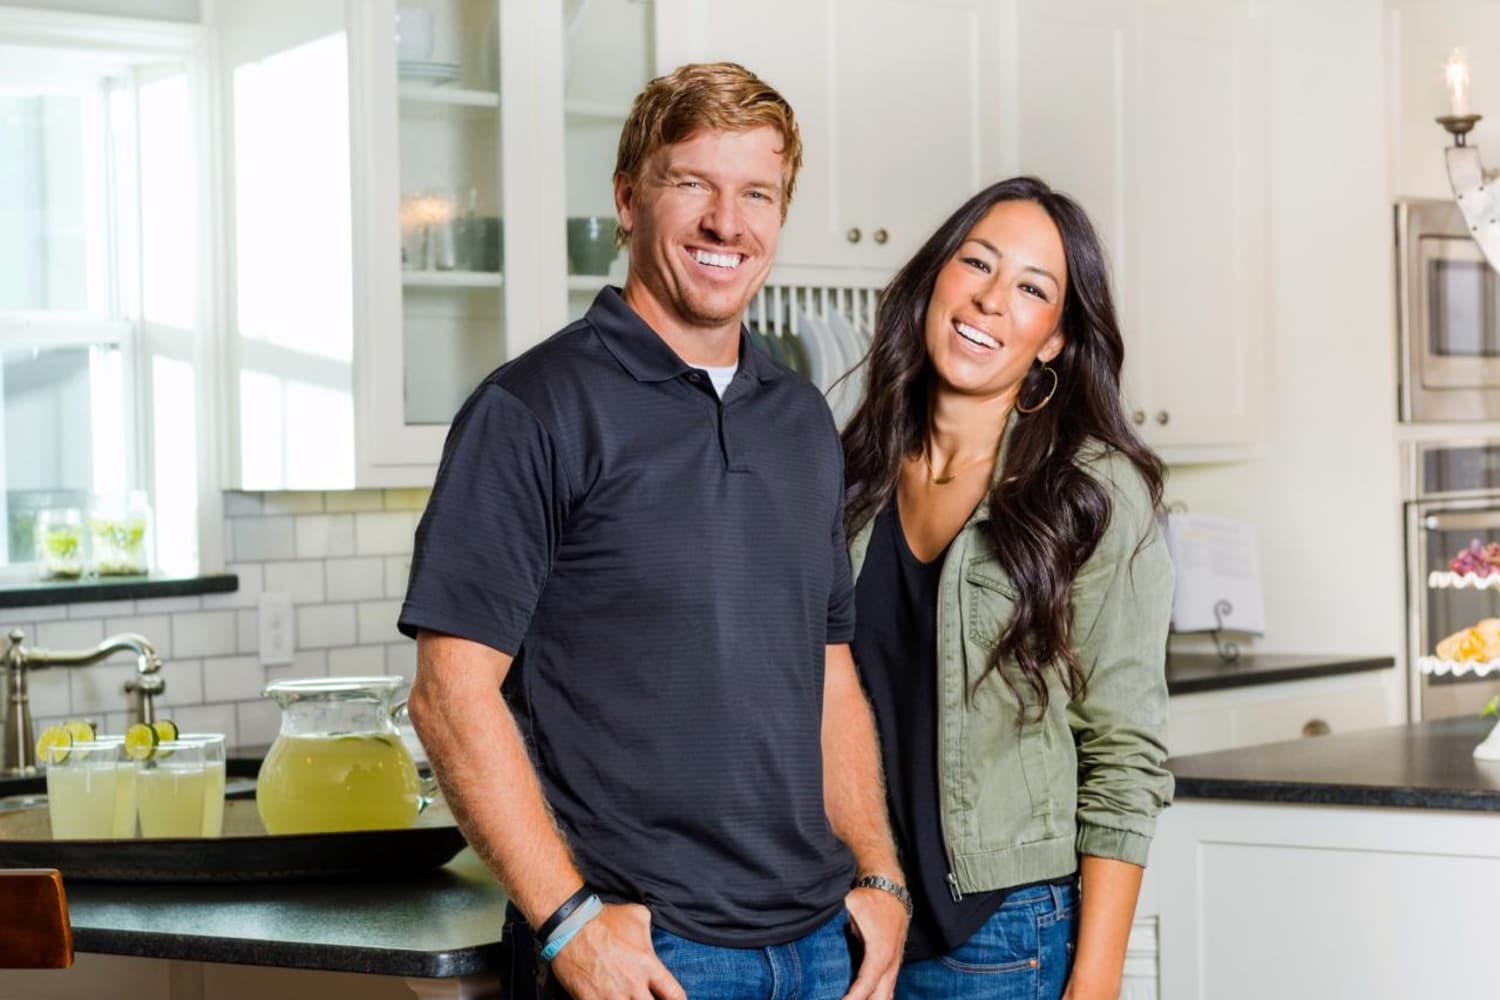 The Anatomy of A “Fixer Upper” Episode